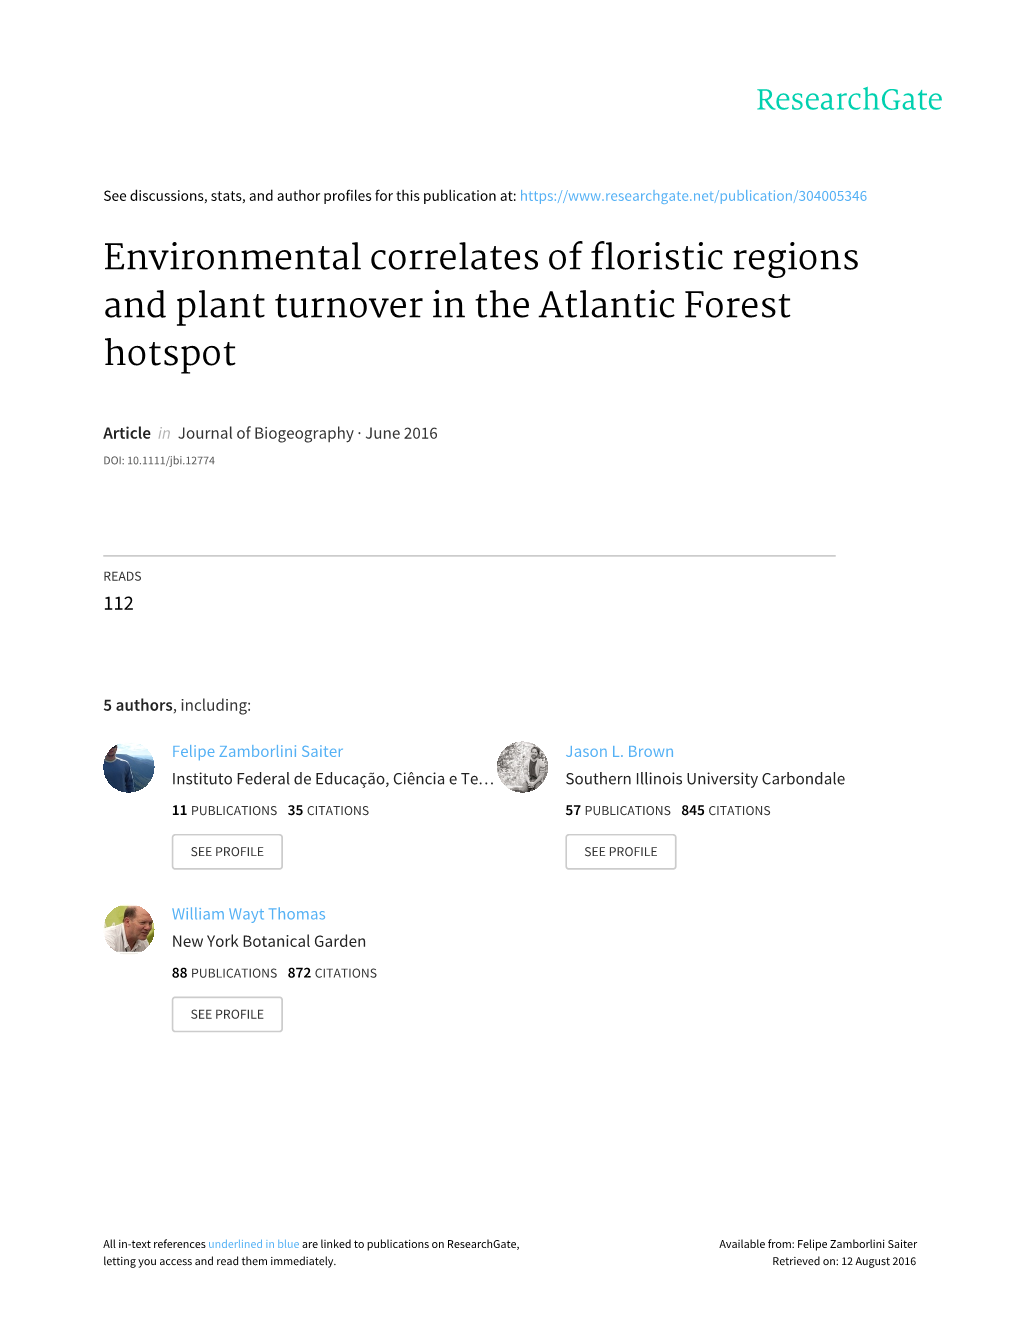 Environmental Correlates of Floristic Regions and Plant Turnover in the Atlantic Forest Hotspot